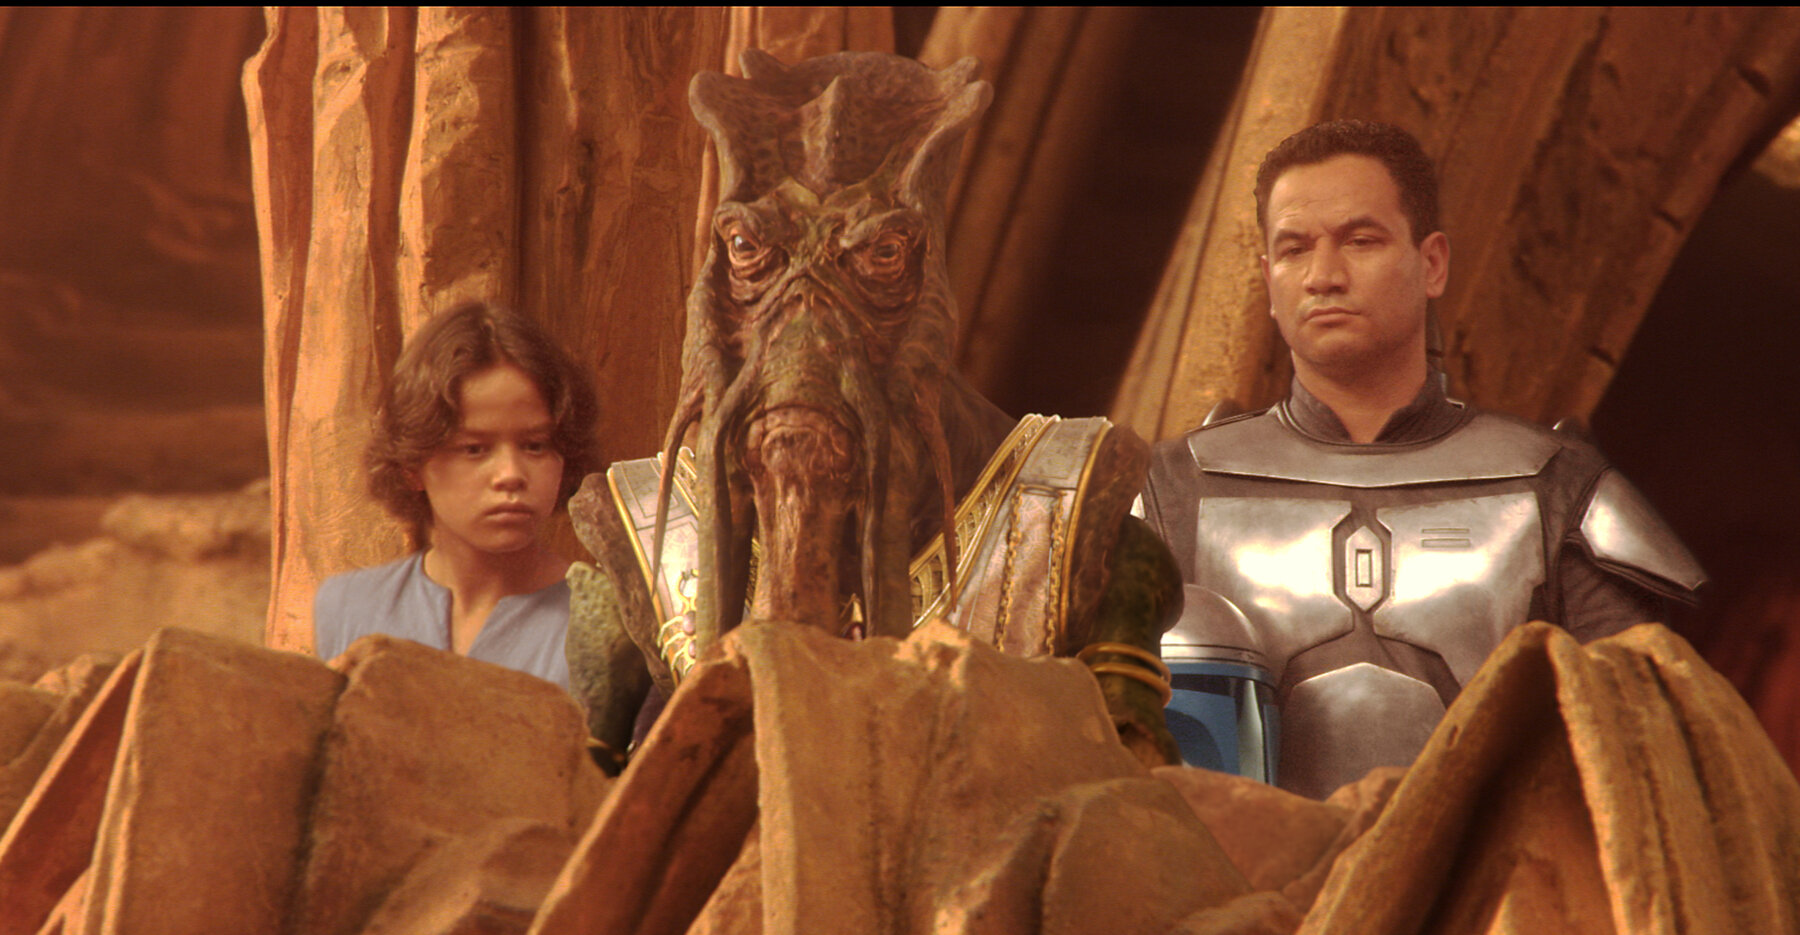 On the right: Actor Temuera Morrison as Jango Fett. To the left, the role of Boba Fett.... which Morrison is now playing. (Image: Disney)